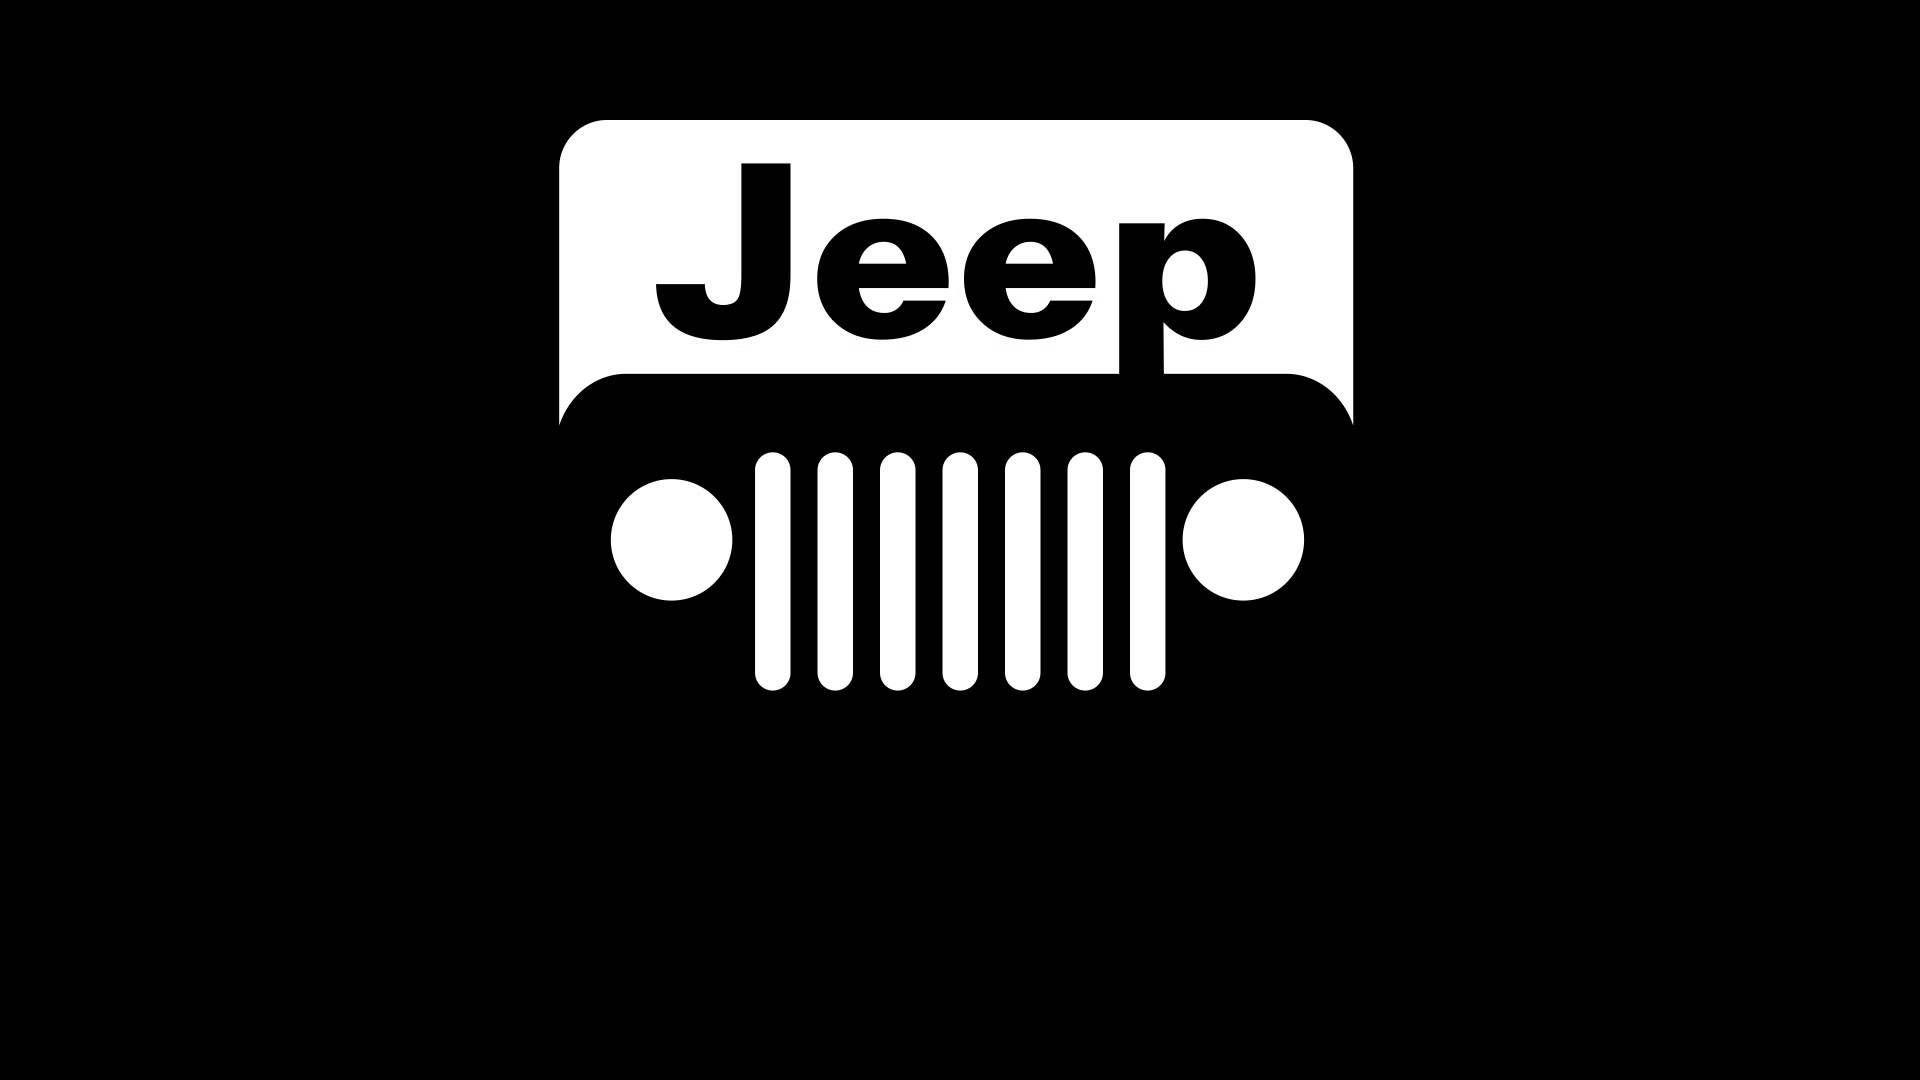 Black Jeep Grill Logo - 65+ Jeep Logo Wallpapers on WallpaperPlay